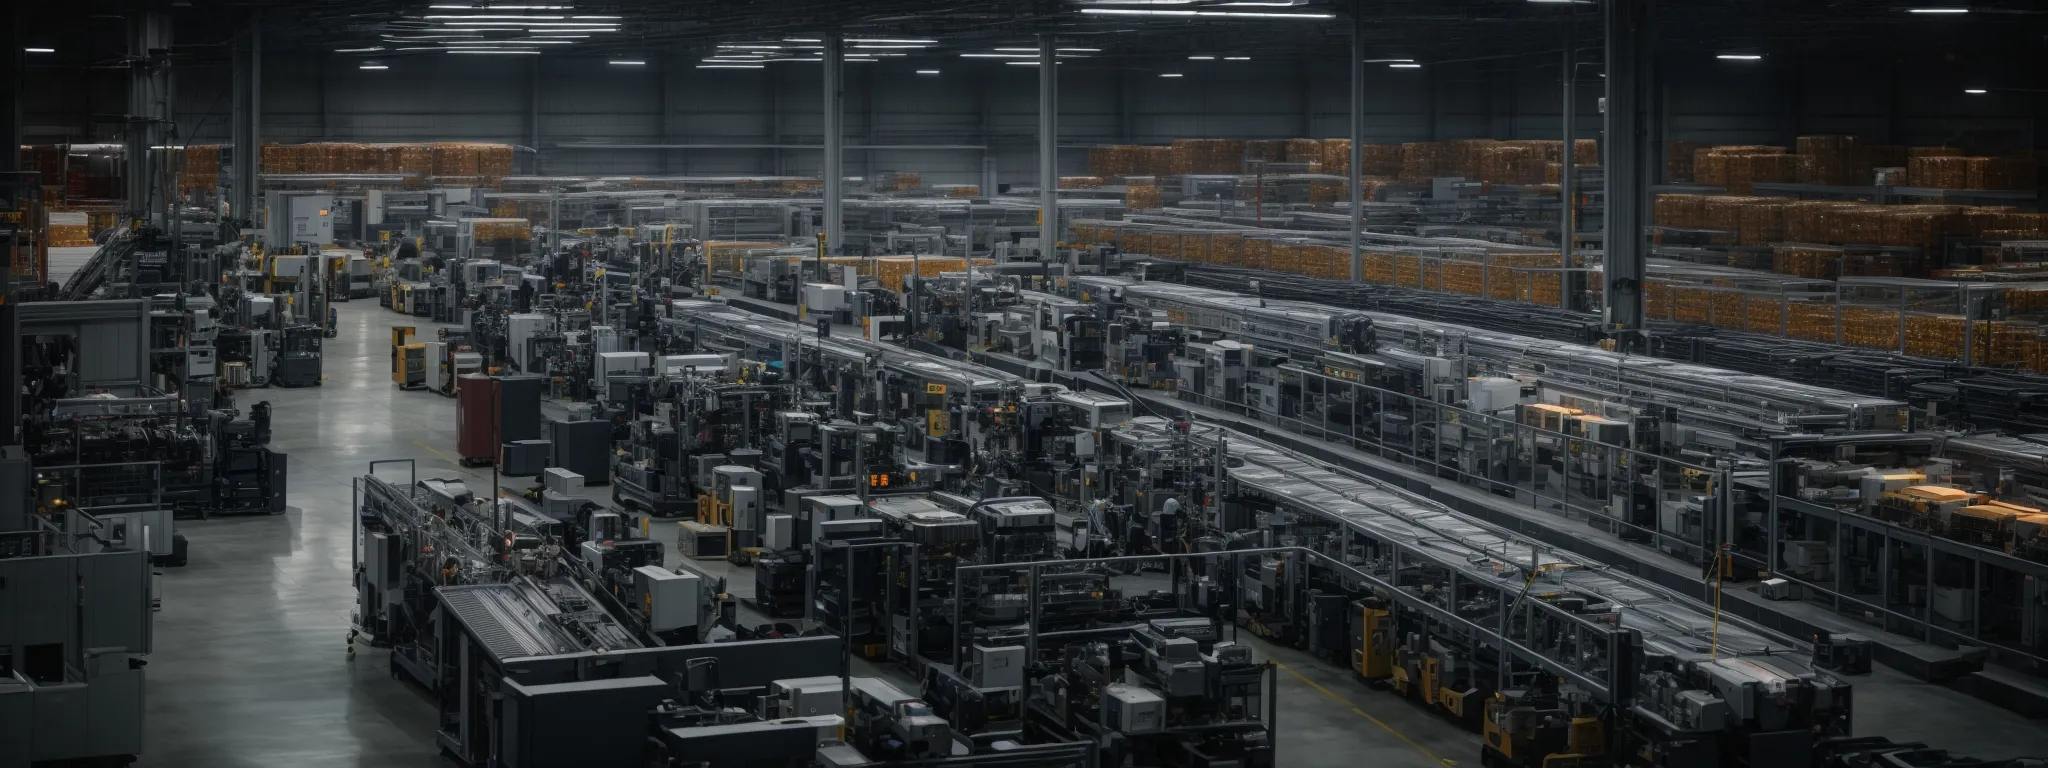 a vast warehouse with rows of machines and conveyor belts in operation, overseen by a control room with multiple computer screens displaying analytical data.